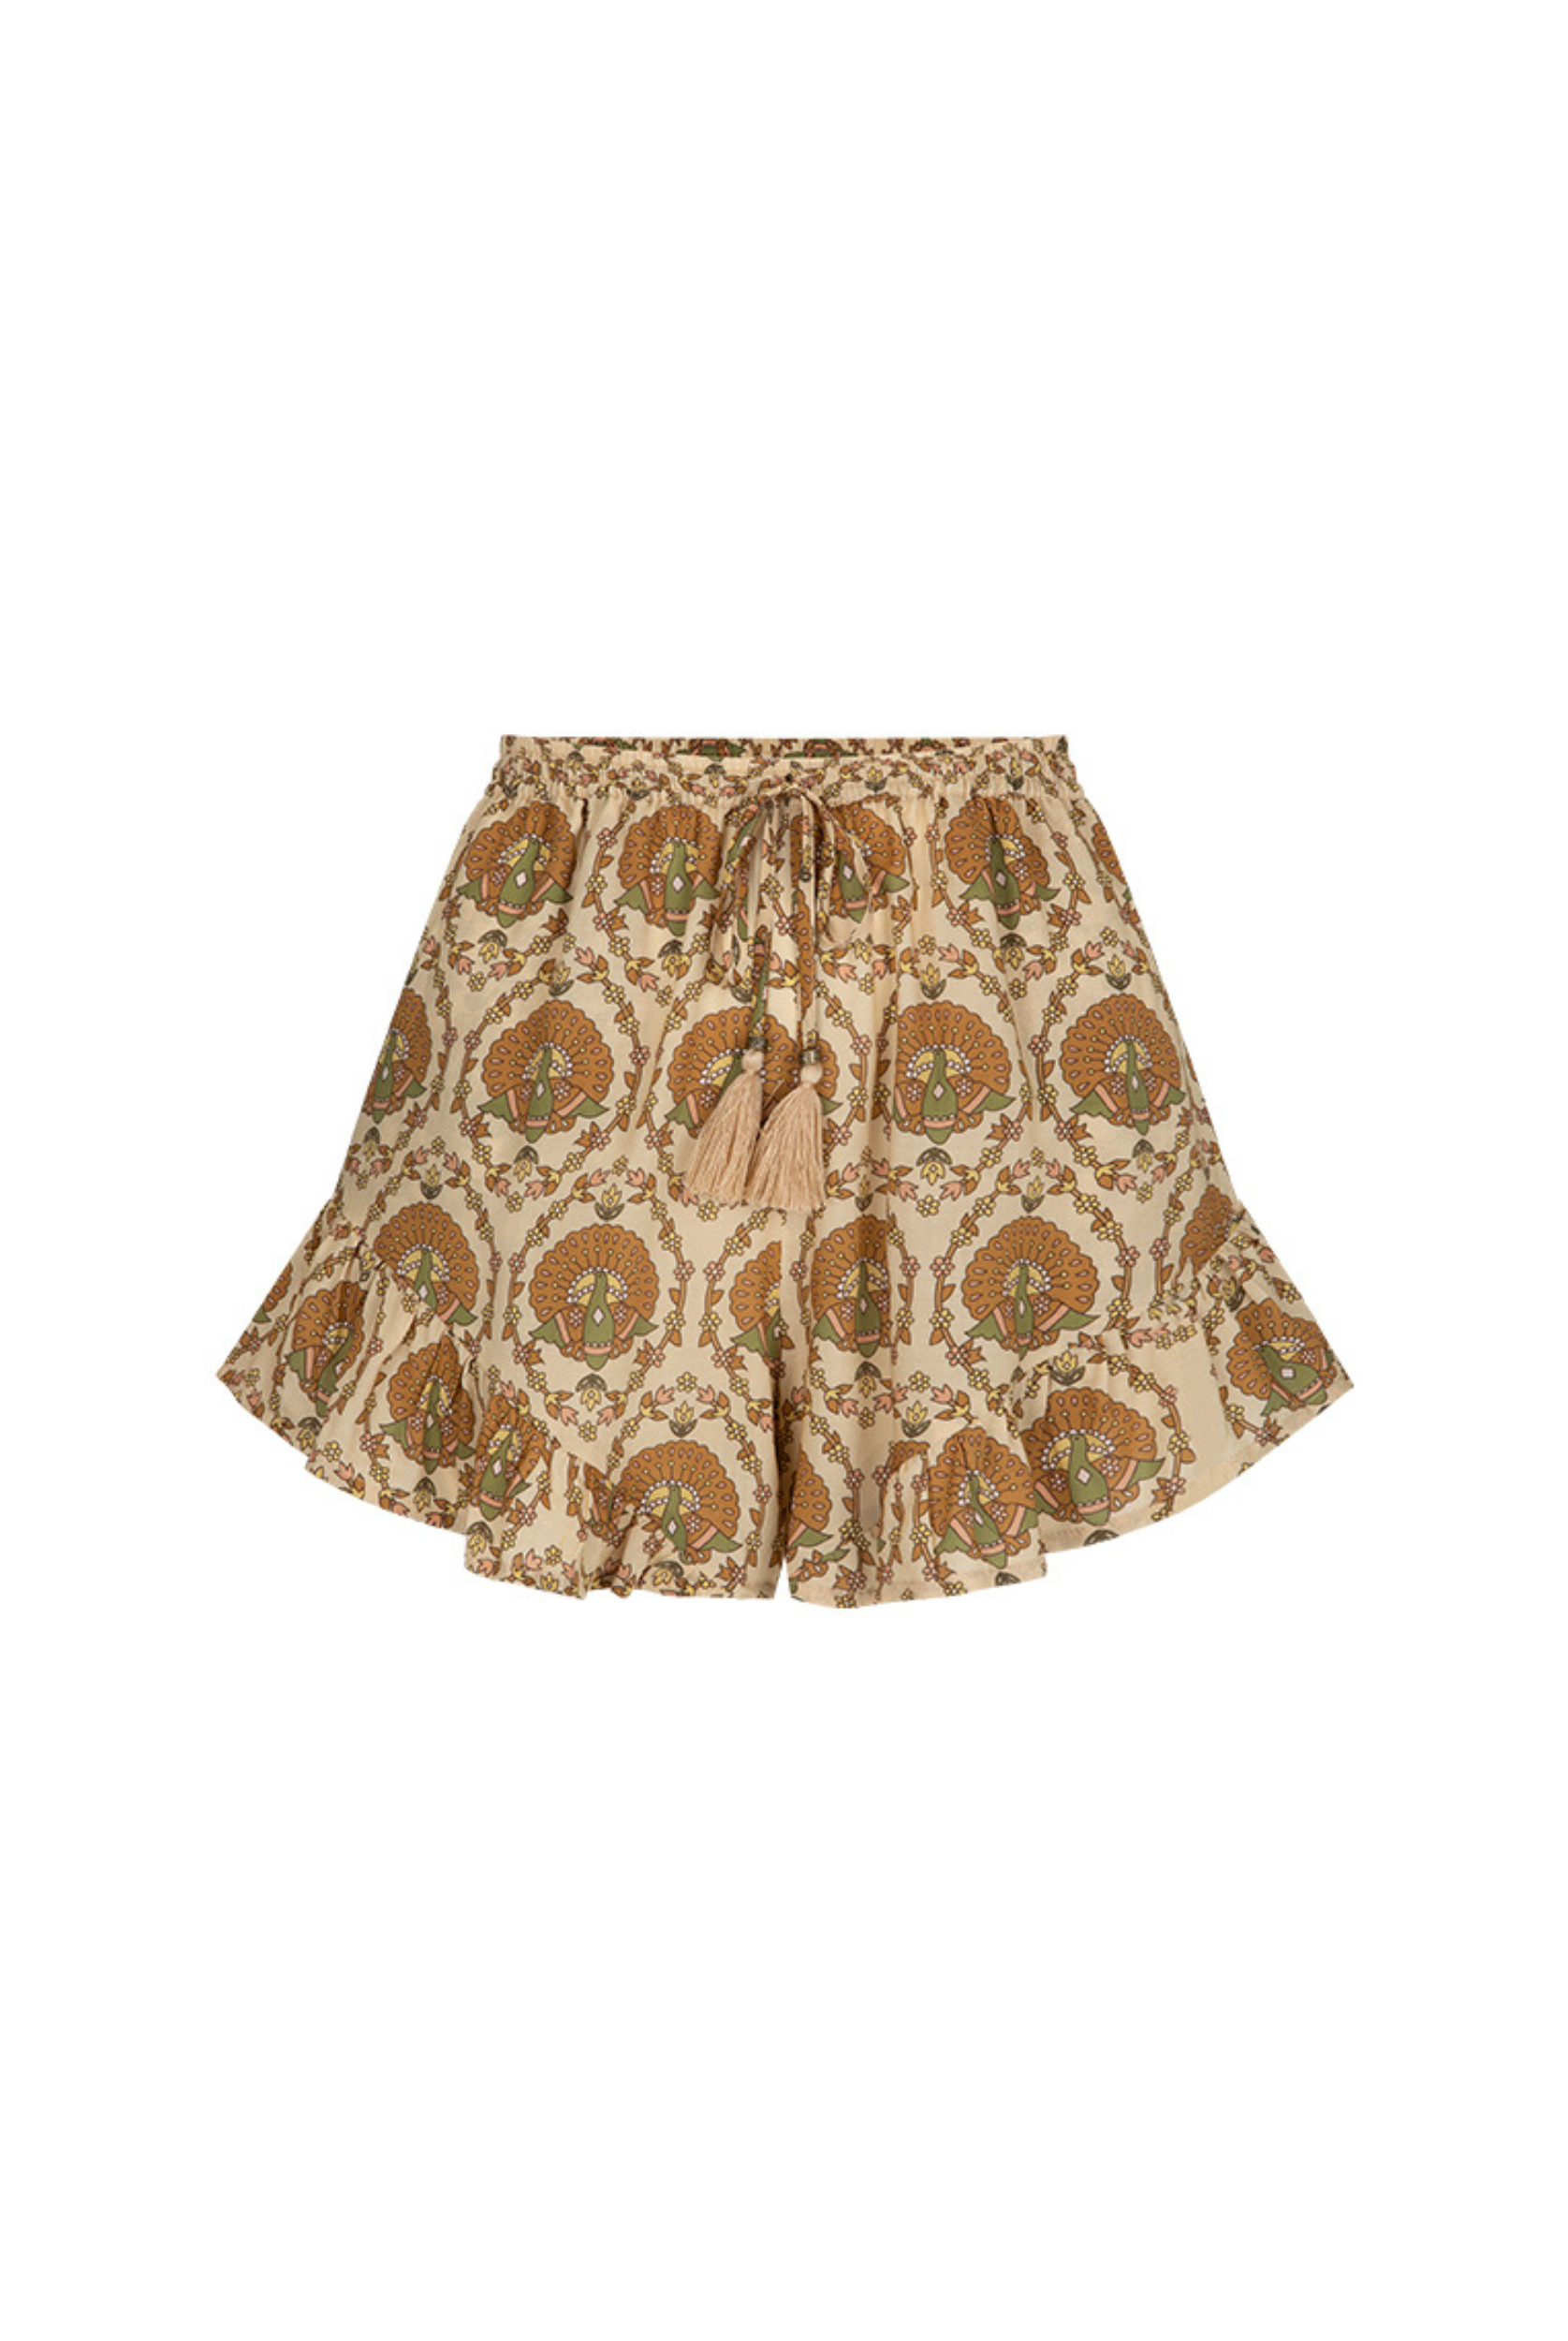 Spell Chateau Flutter Short in Champagne with elasticated waist and ties